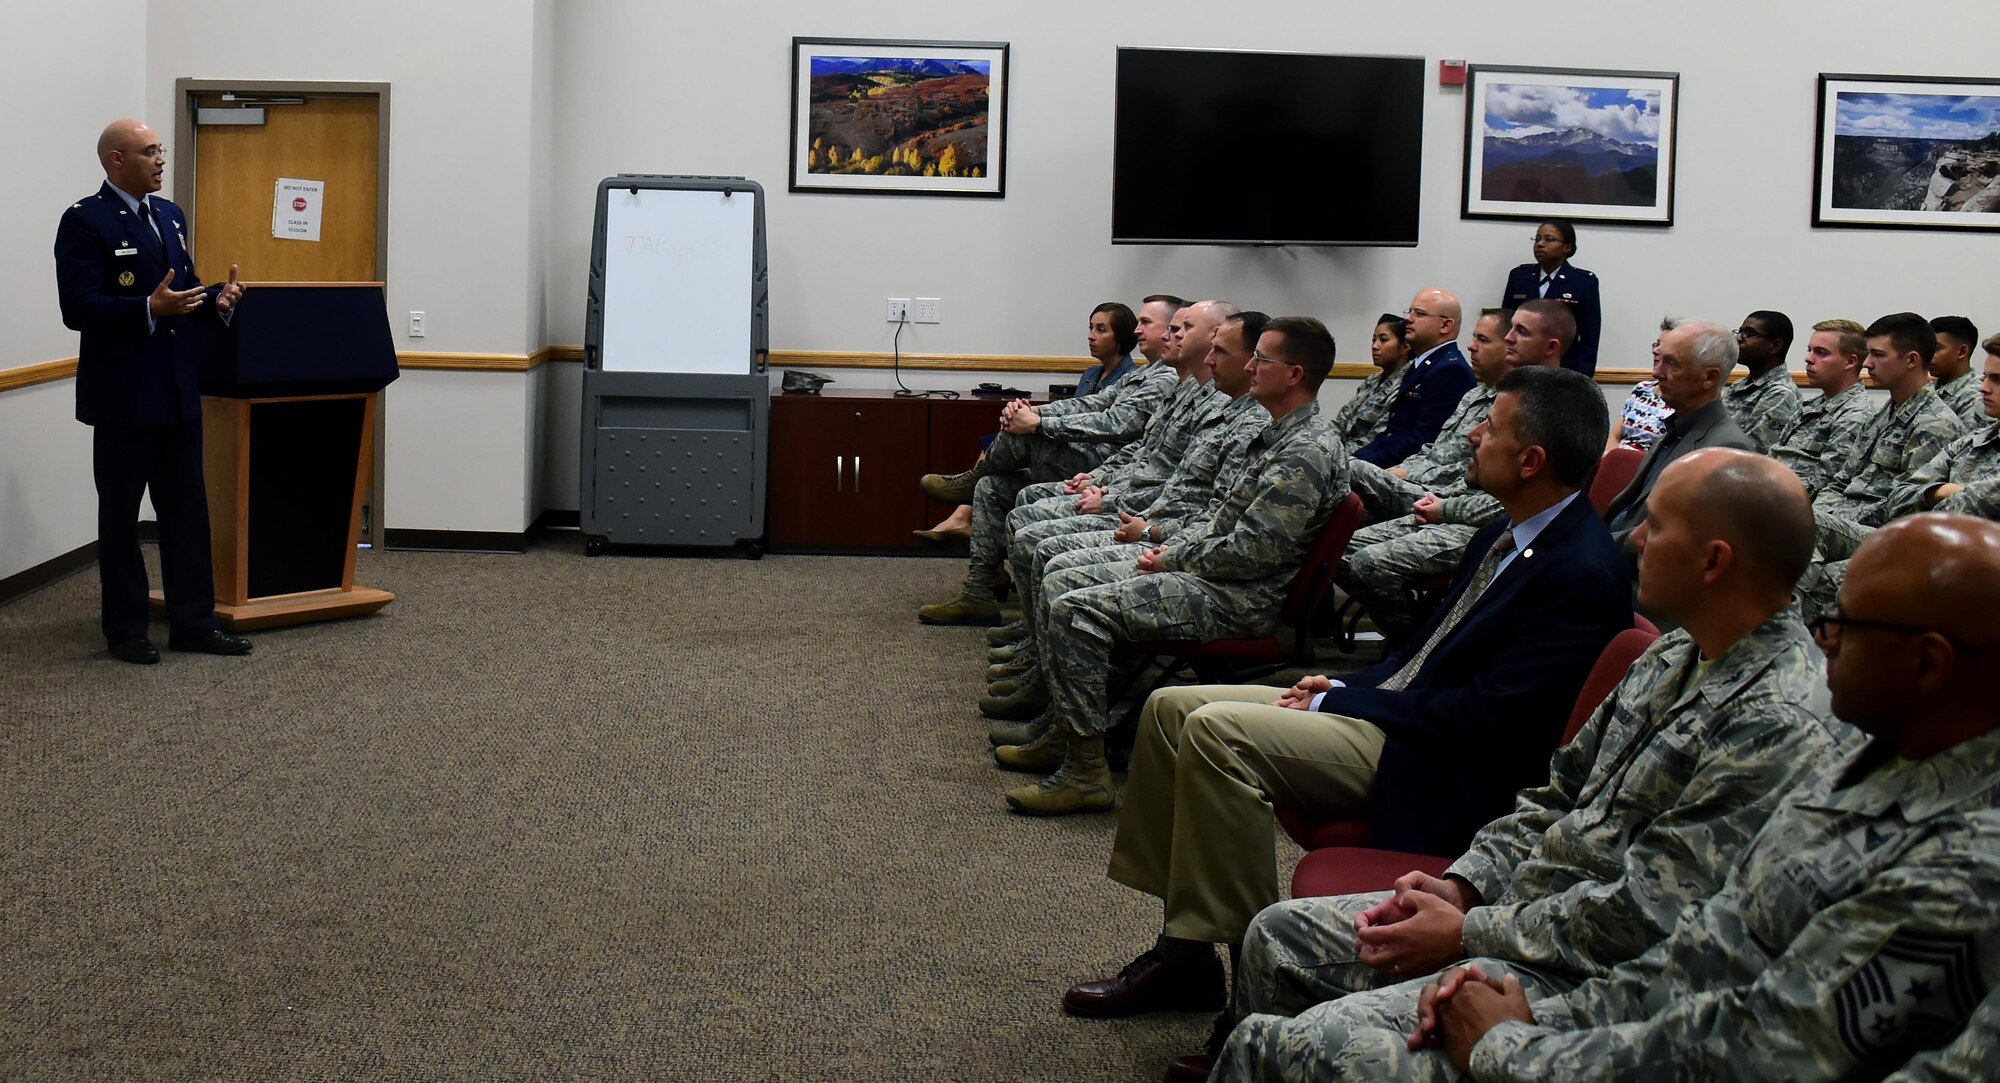 Col. David Miller, 460th Space Wing commander, addresses the audience for closing remarks, Nov. 10, 2016, at Buckley Air Force Base, Colo.  Members of Team Buckley gathered for a short Veterans Day speech presented by Chief Master Sgt. (ret.) Rene Simard, a prior command chief at Buckley AFB. (U.S. Air Force photo by Airman Holden S. Faul/ Released)